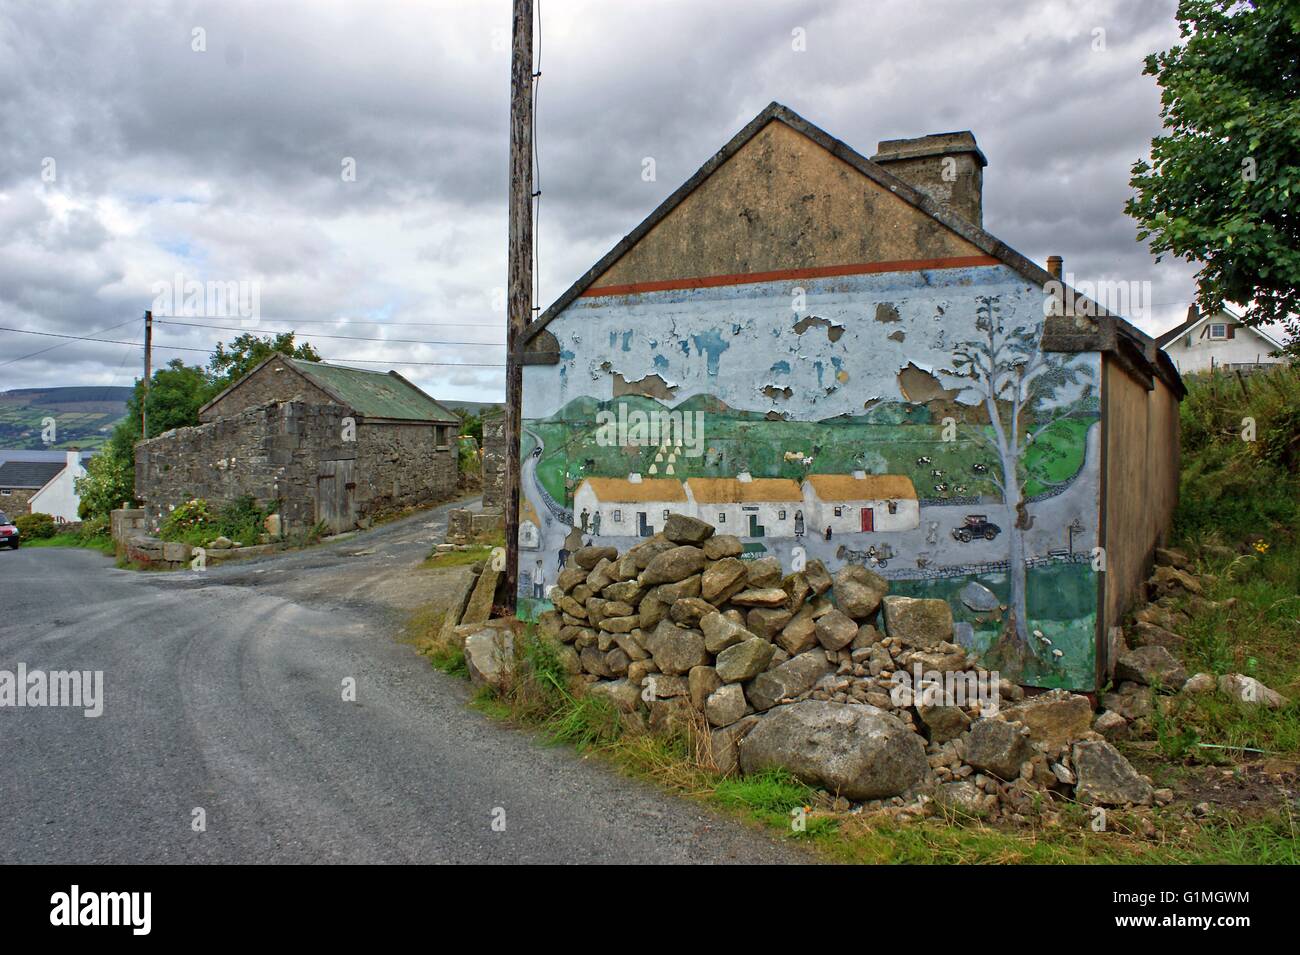 Old painting, Graffiti on a old stone cottage, in Ireland, showing village houses. In front rubble of stones, a  Irish village Stock Photo